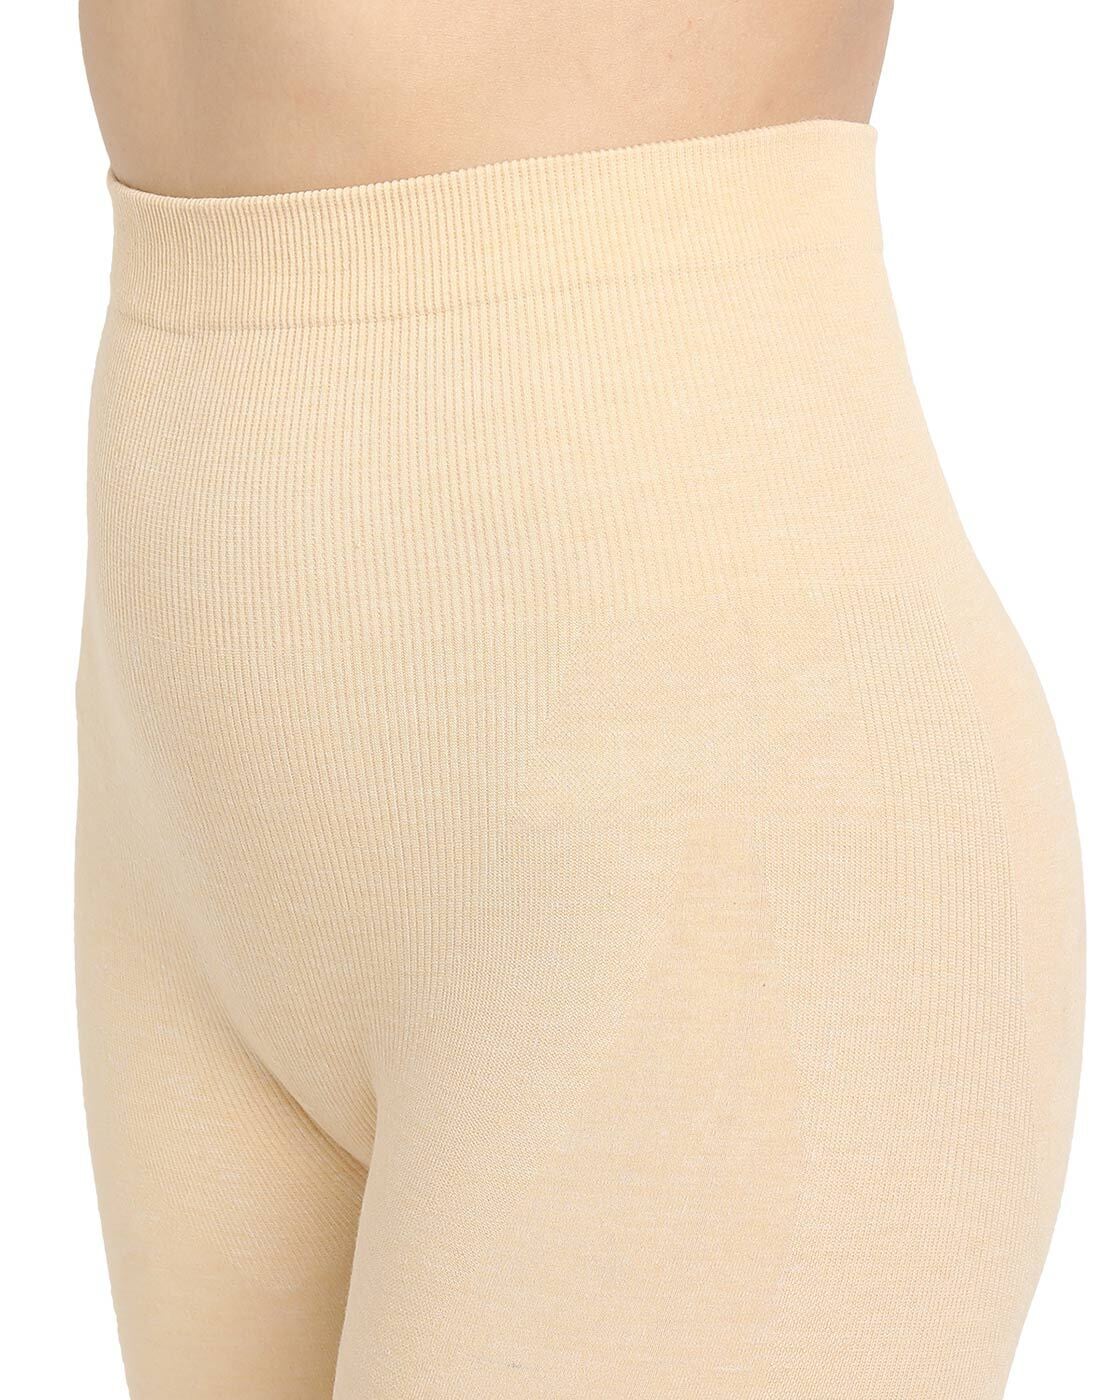 Buy Sankom Women Shaper Beige S And M in Qatar Orders delivered quickly -  Wellcare Pharmacy